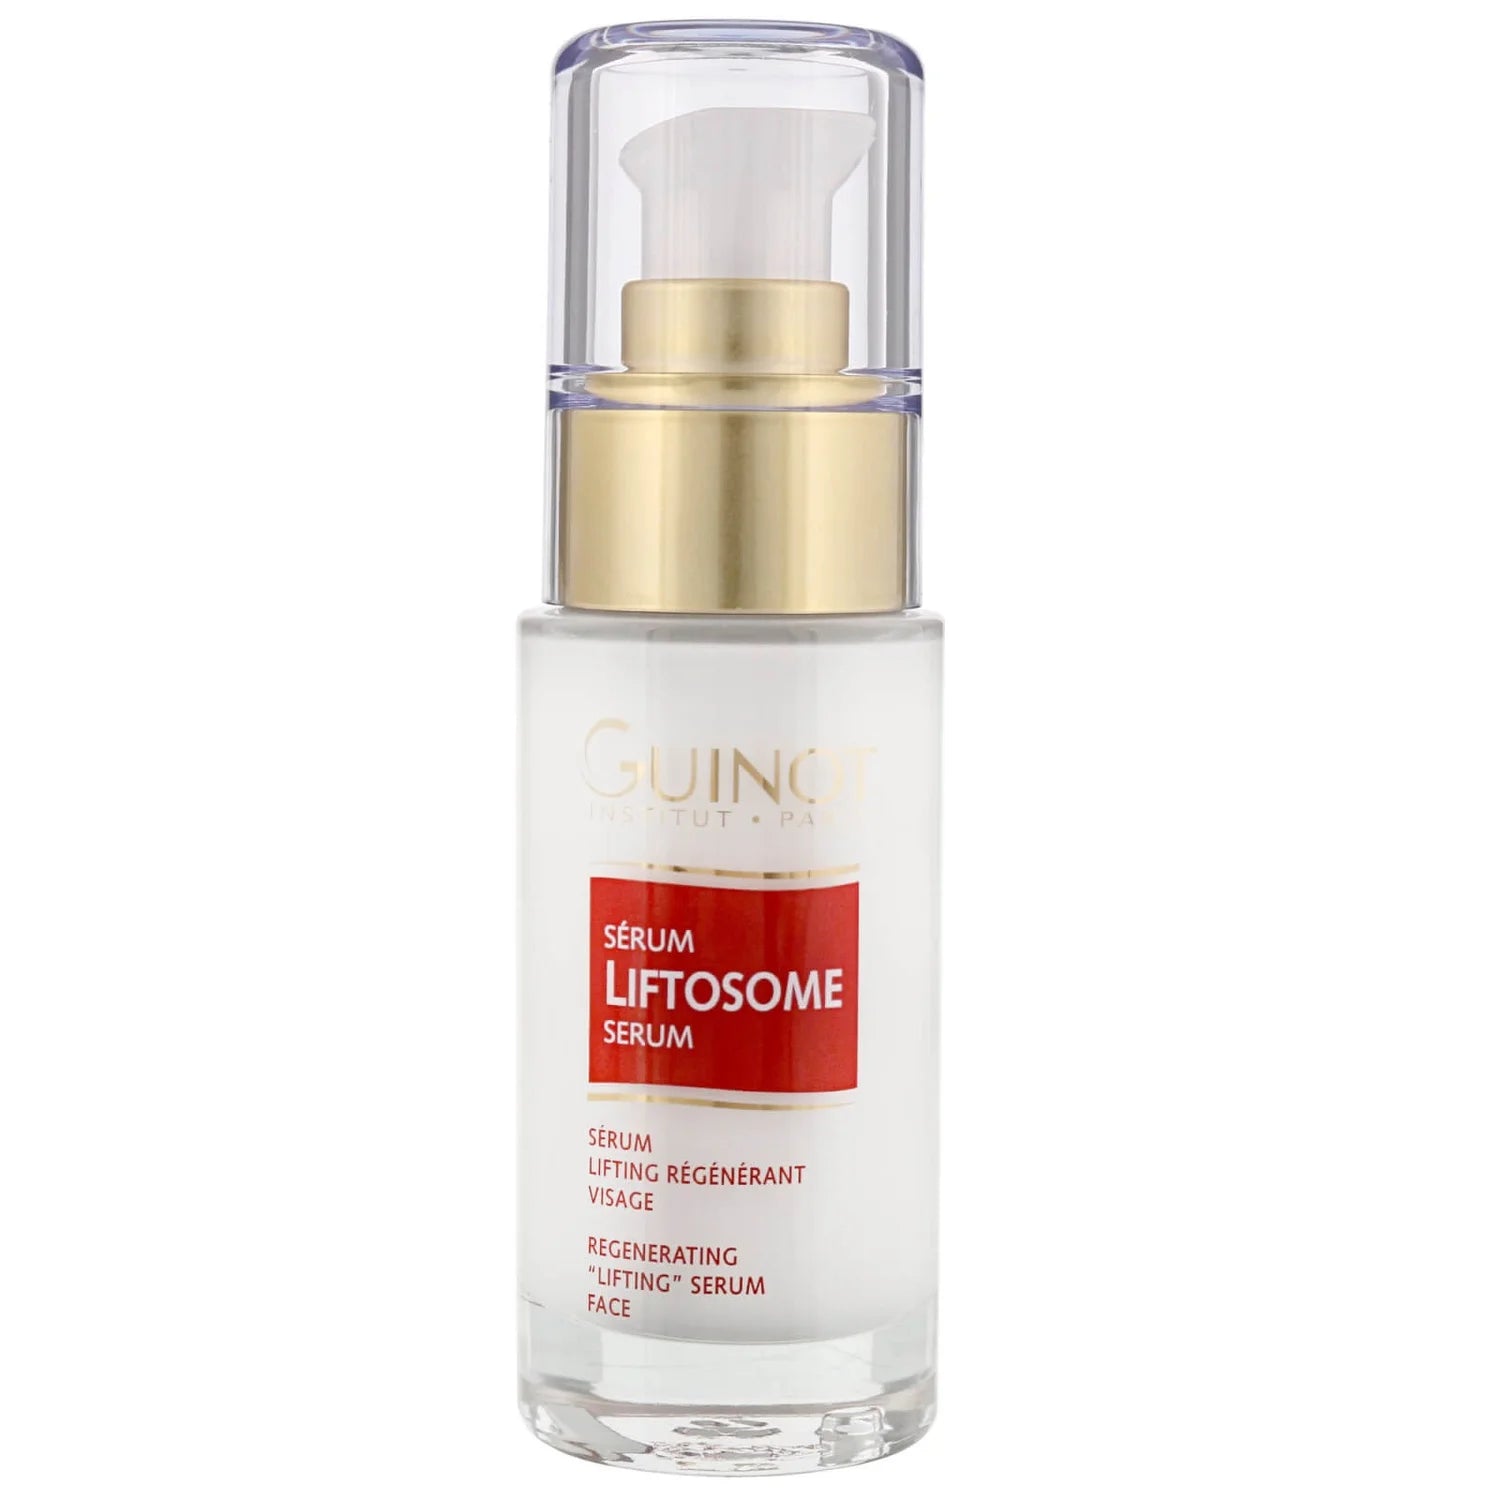 Guinot Liftosome Firming Face Serum product image. 